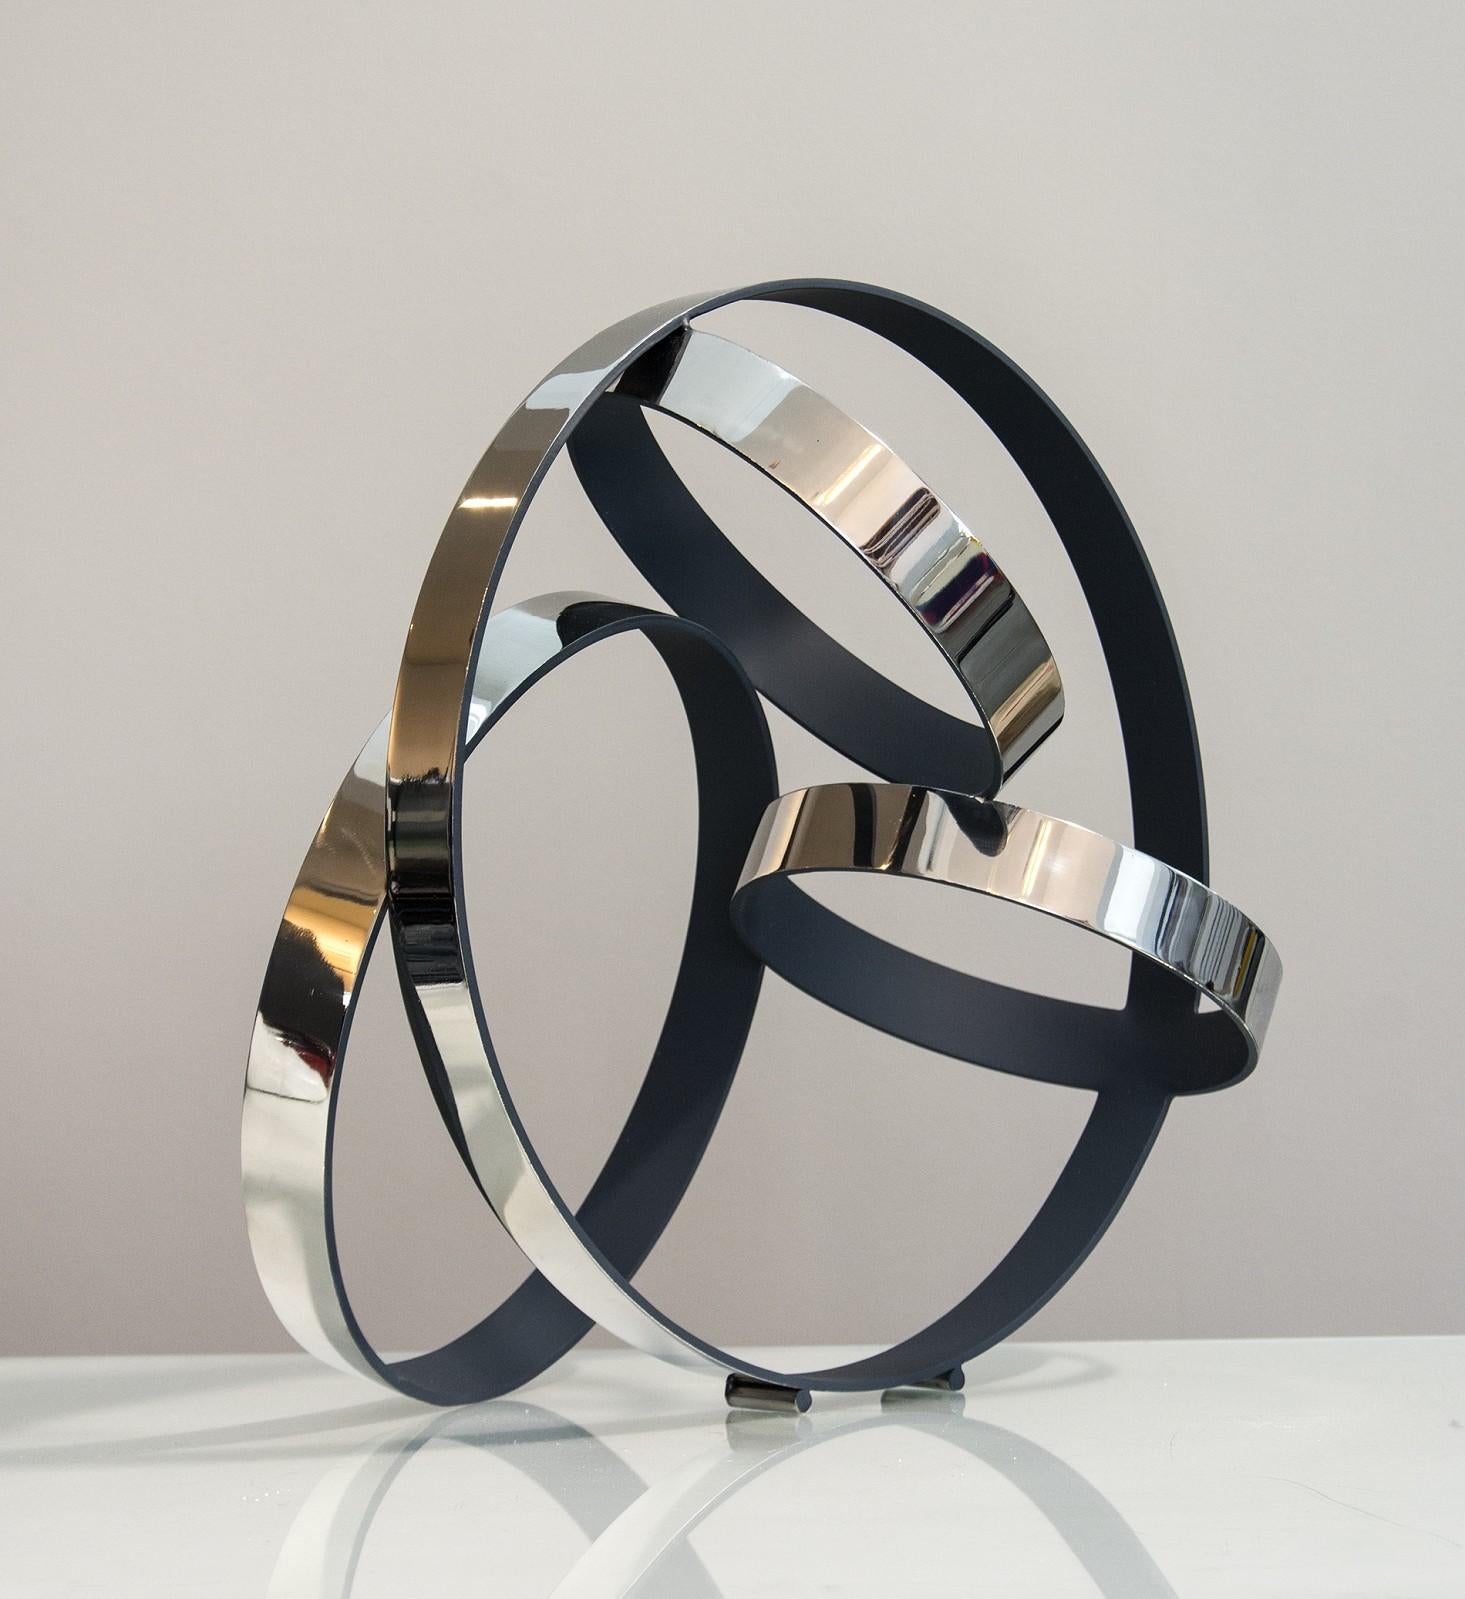 Four Ring Temps Zero Blue Poseidon 3/10 - Steel rings with blue interior - Gray Abstract Sculpture by Philippe Pallafray